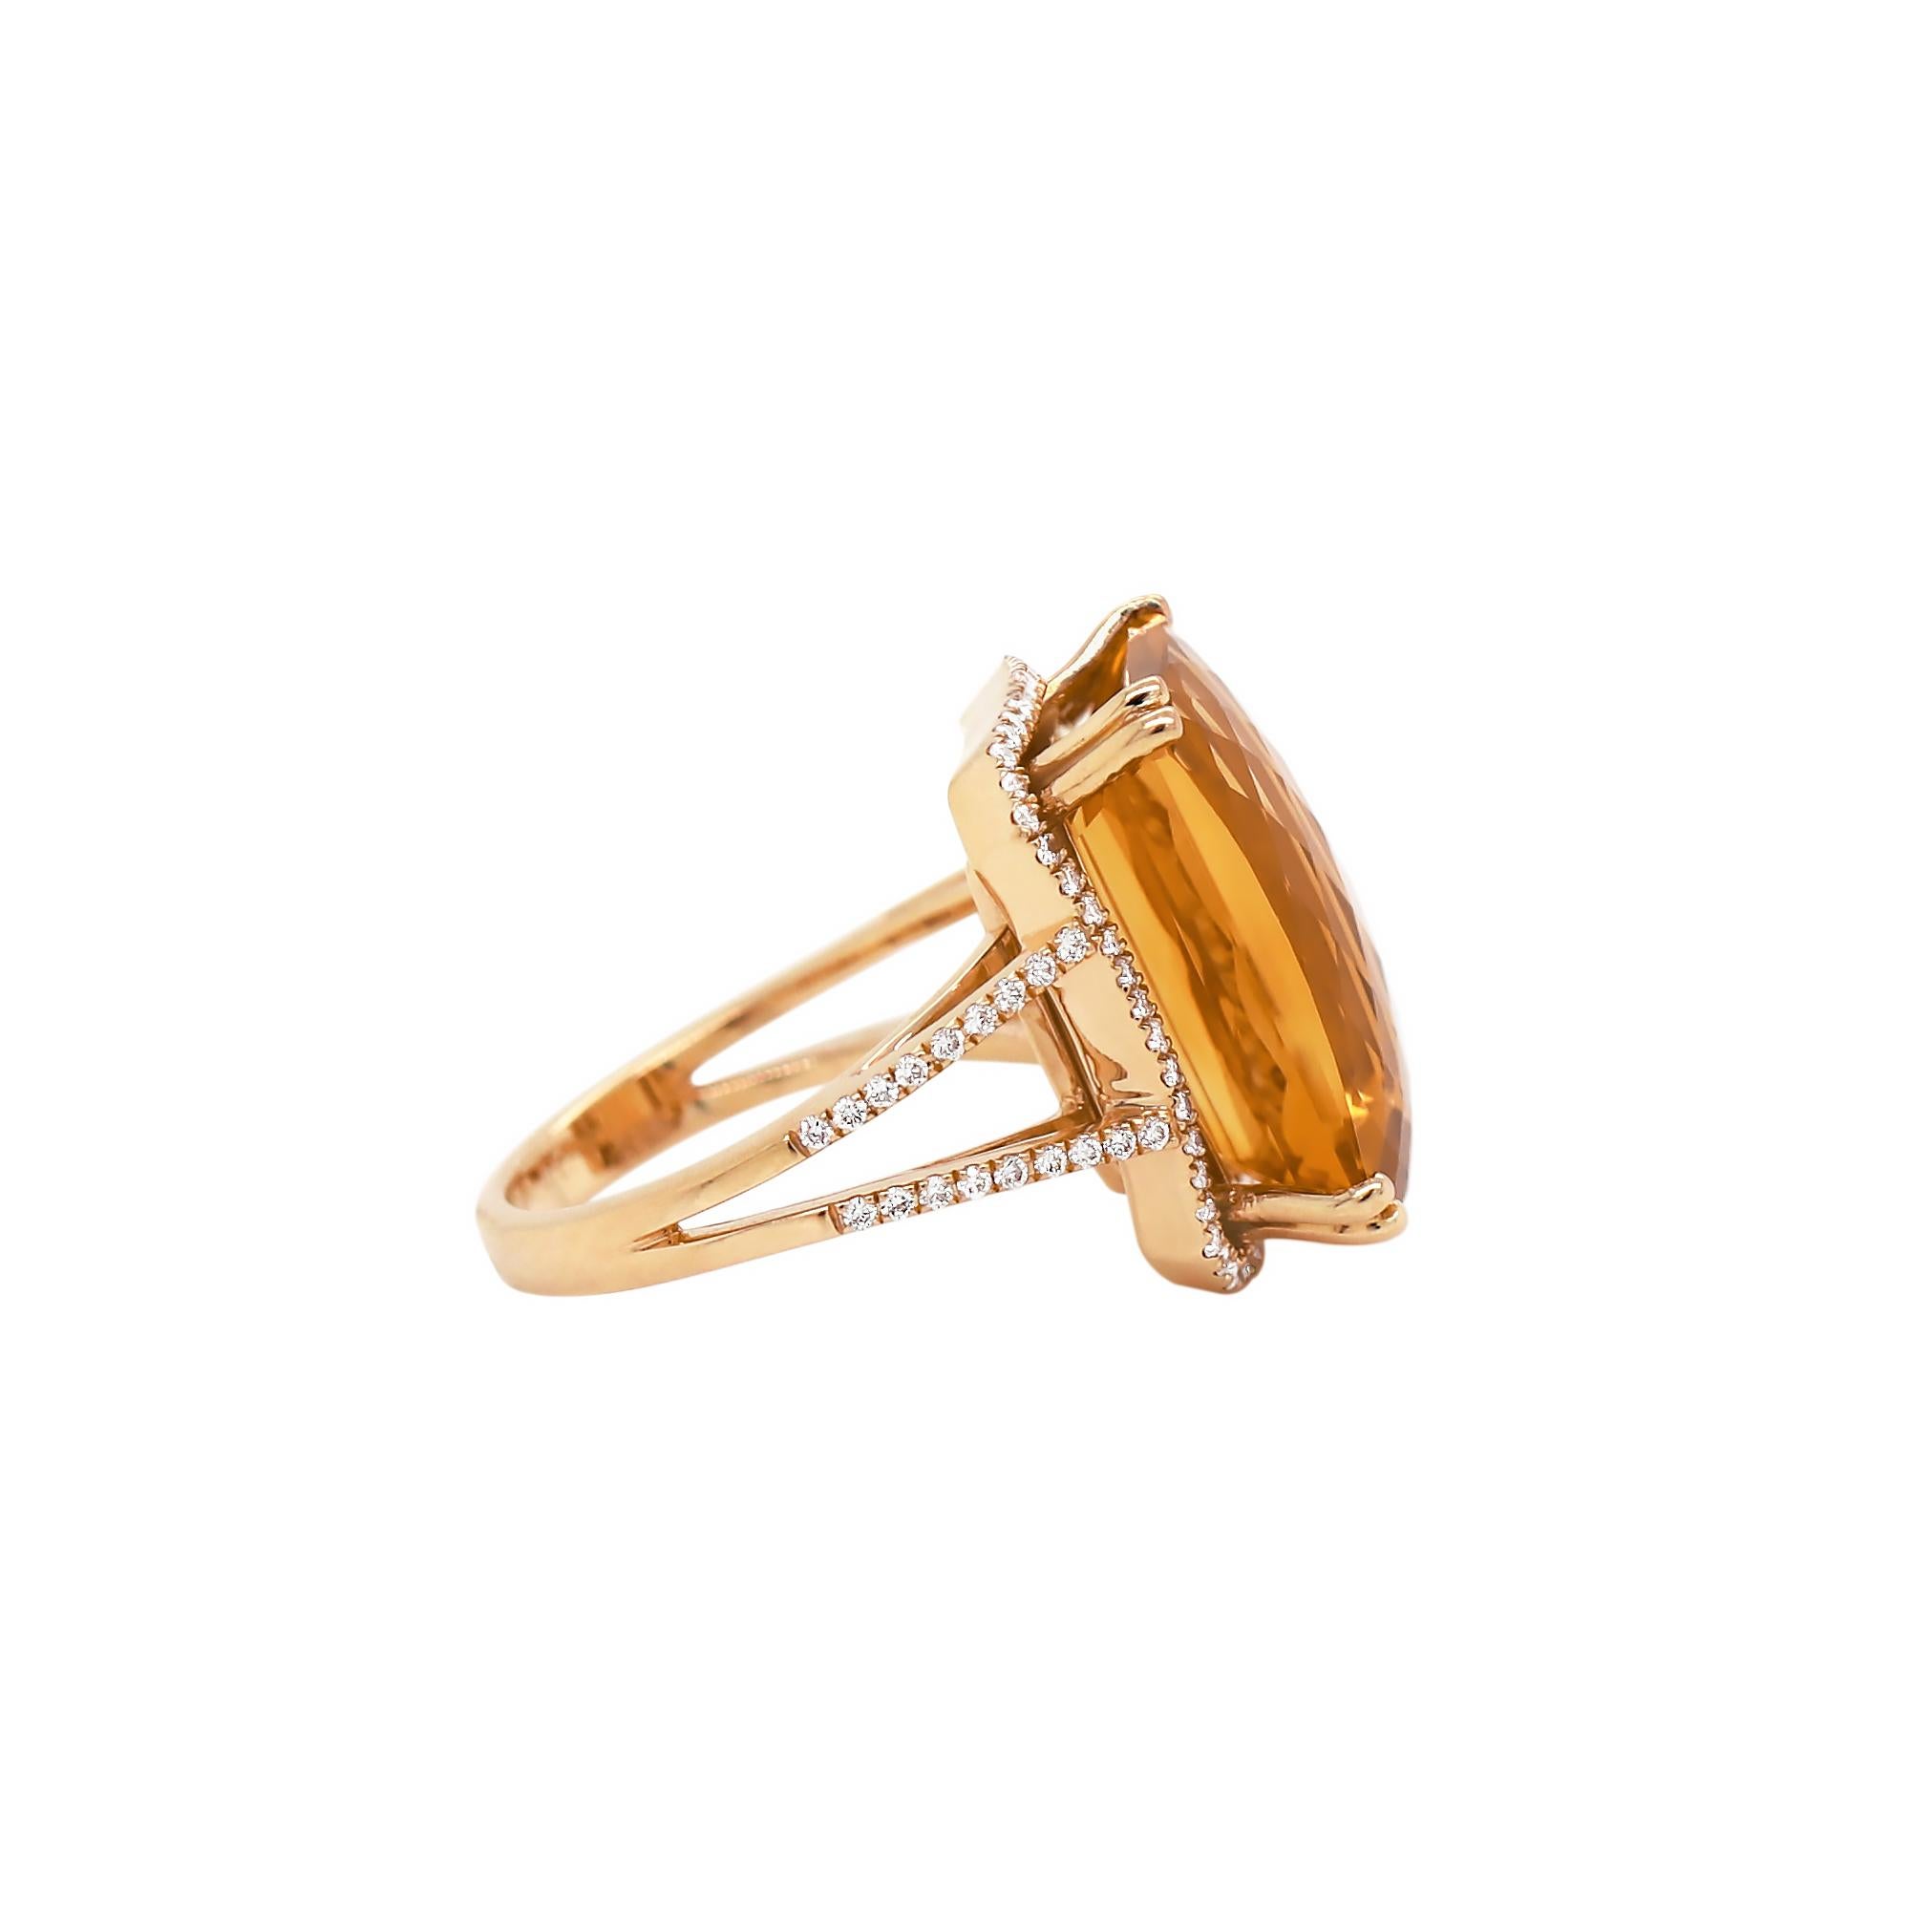 This beautiful cocktail ring features an intense and lively faceted rectangular citrine weighing 13.83ct in a four double claw setting. The stone is framed with a micro set halo of round brilliant cut diamonds and finally finished with diamond set